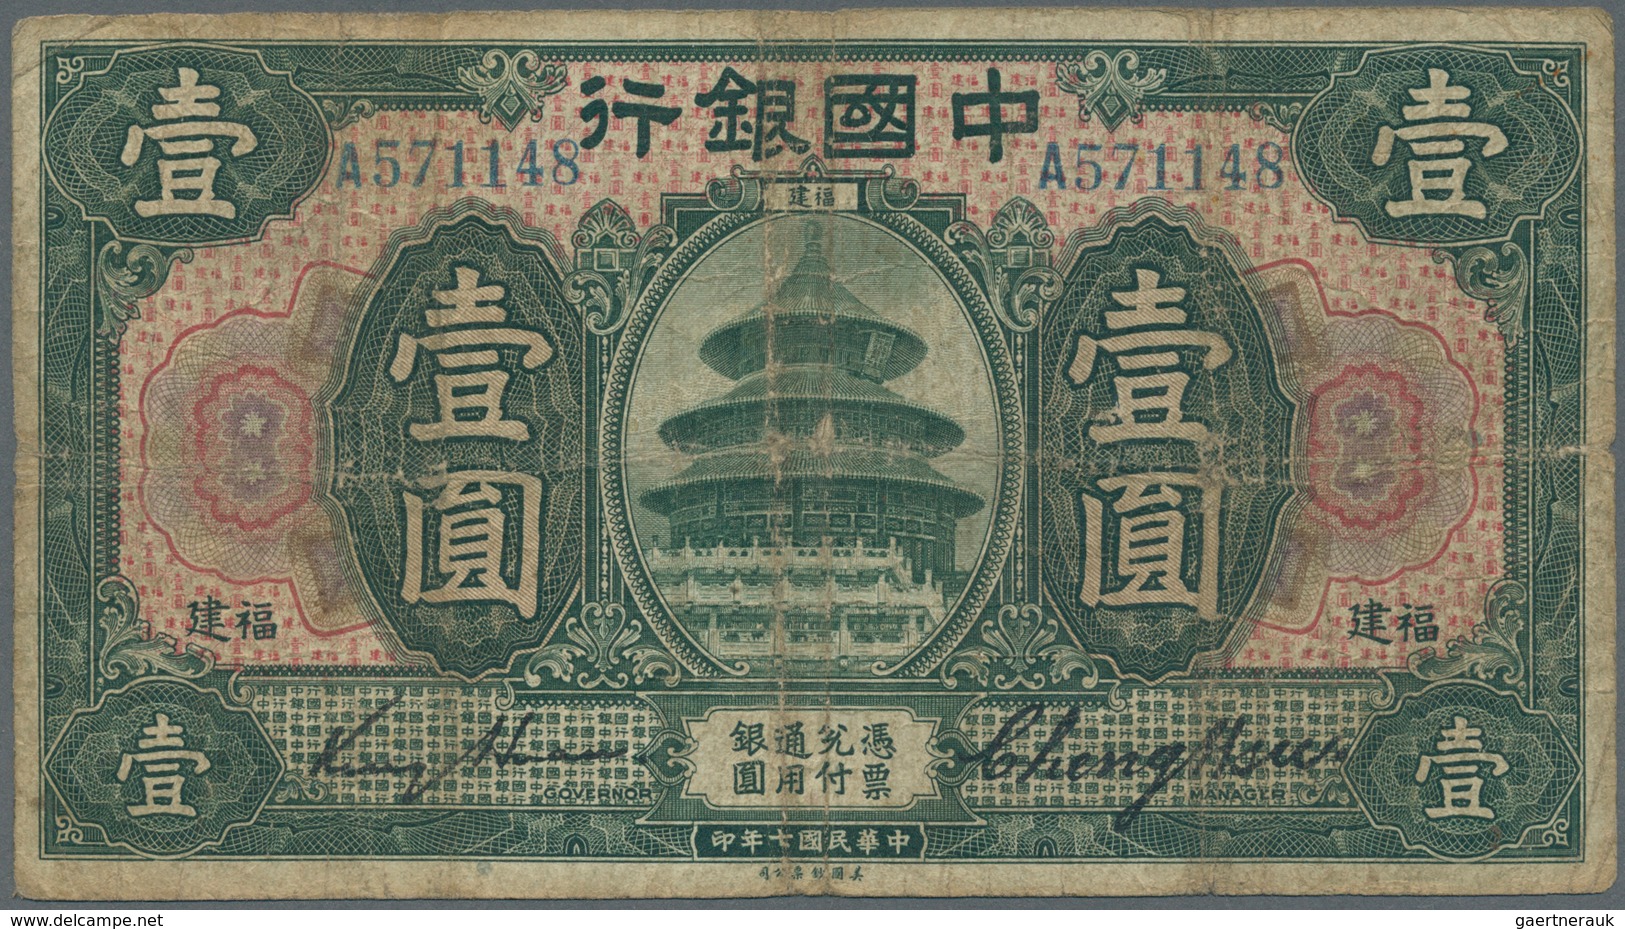 01287 China: 1 Dollar Fukien 1918 P. 51f In Condition: VG To F-. - China